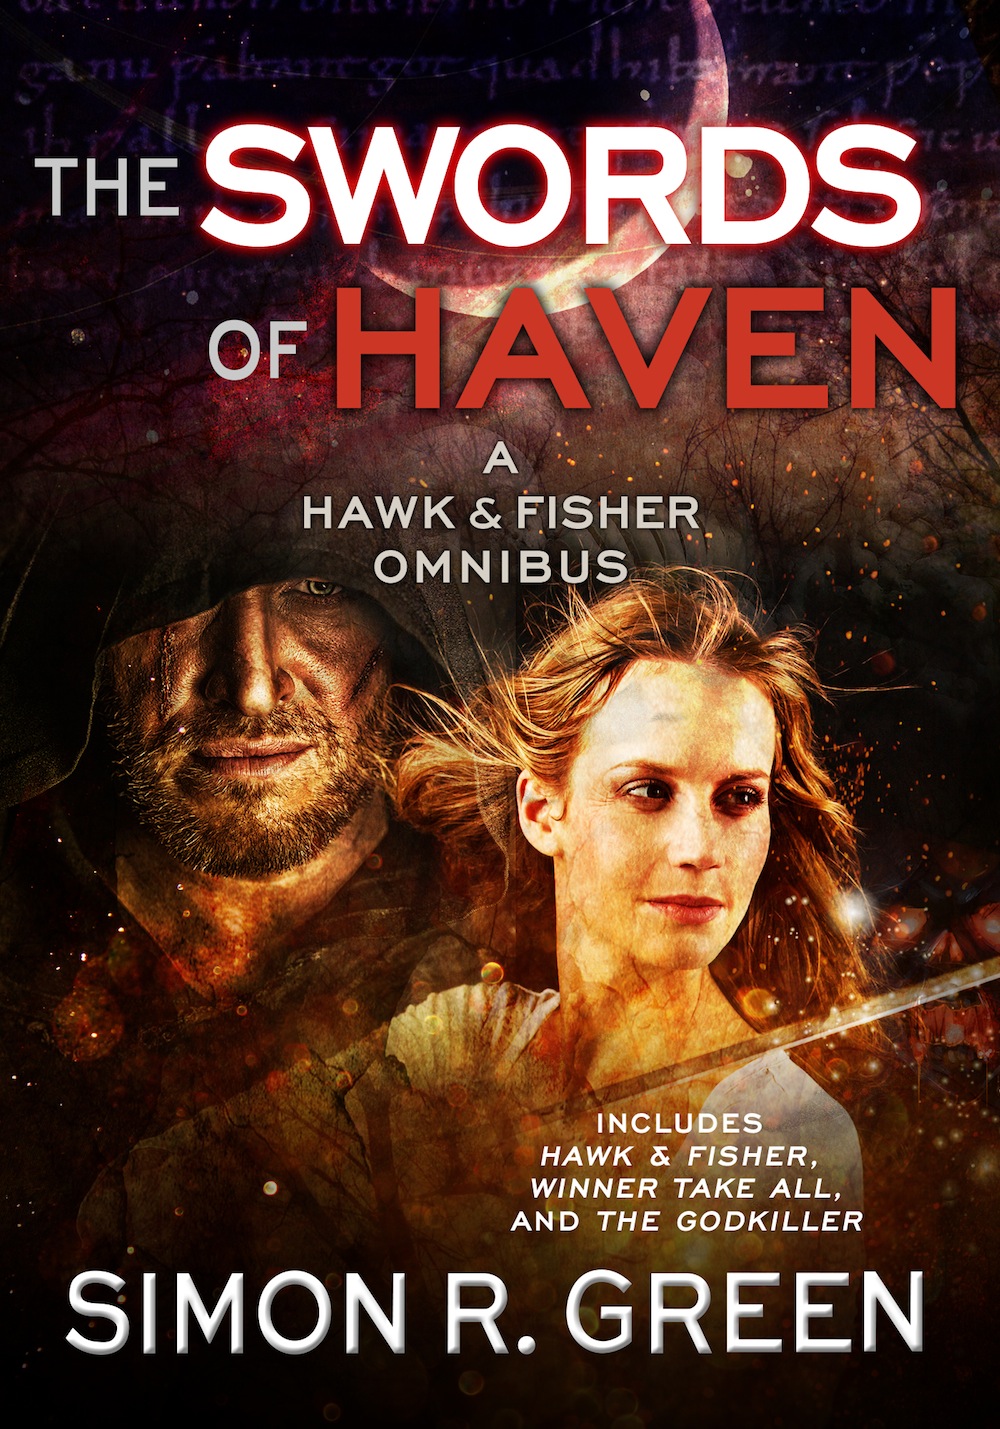 Swords of Haven by Simon R. Green